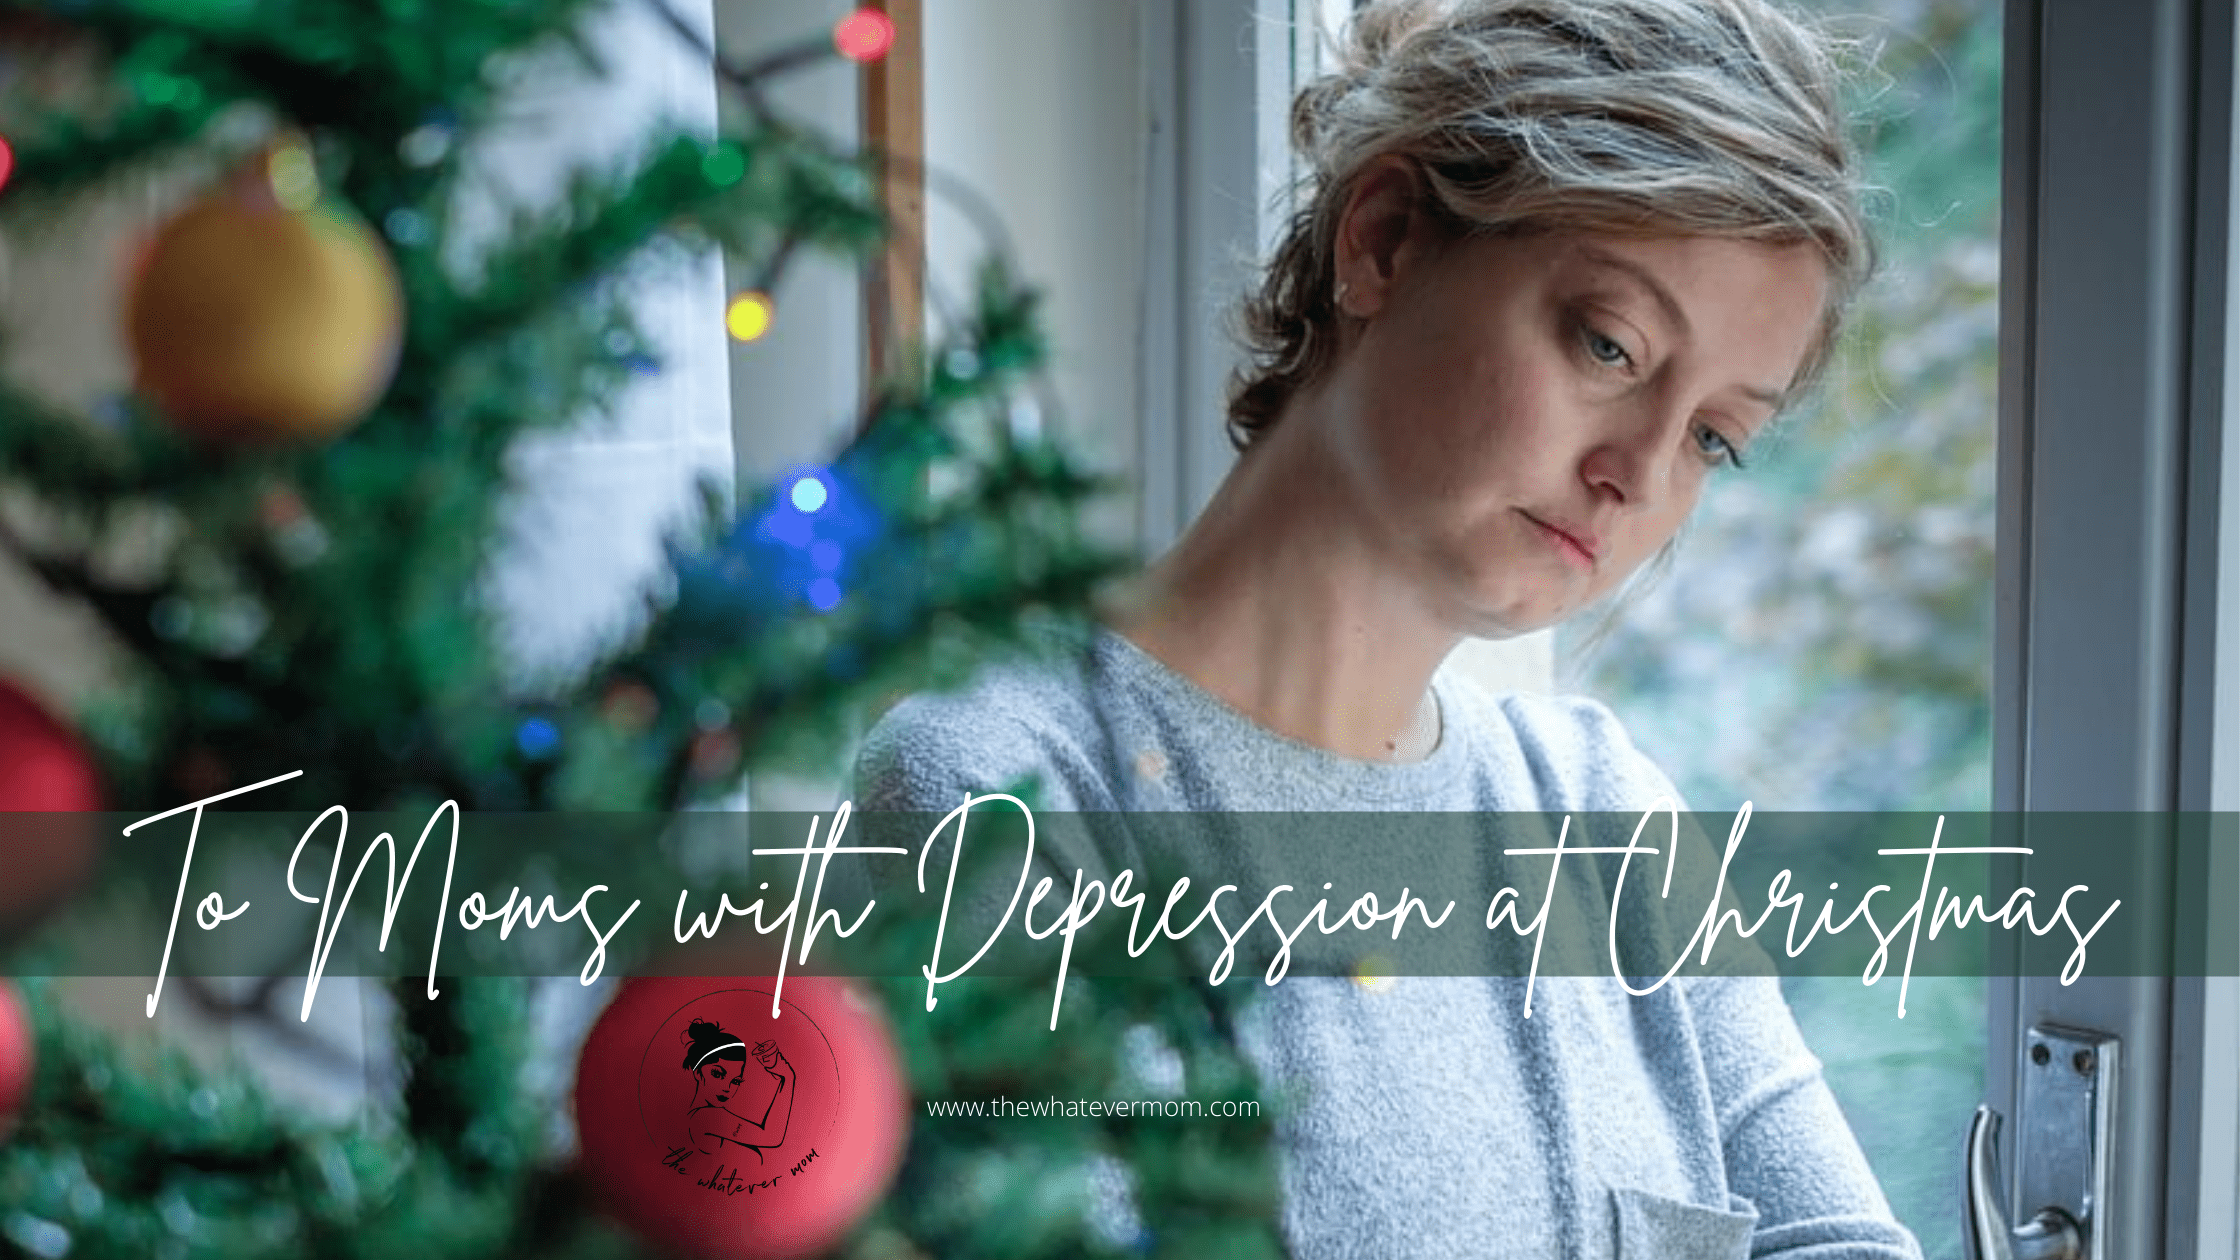 To the Moms Living with Depression at Christmas – The Whatever Mom